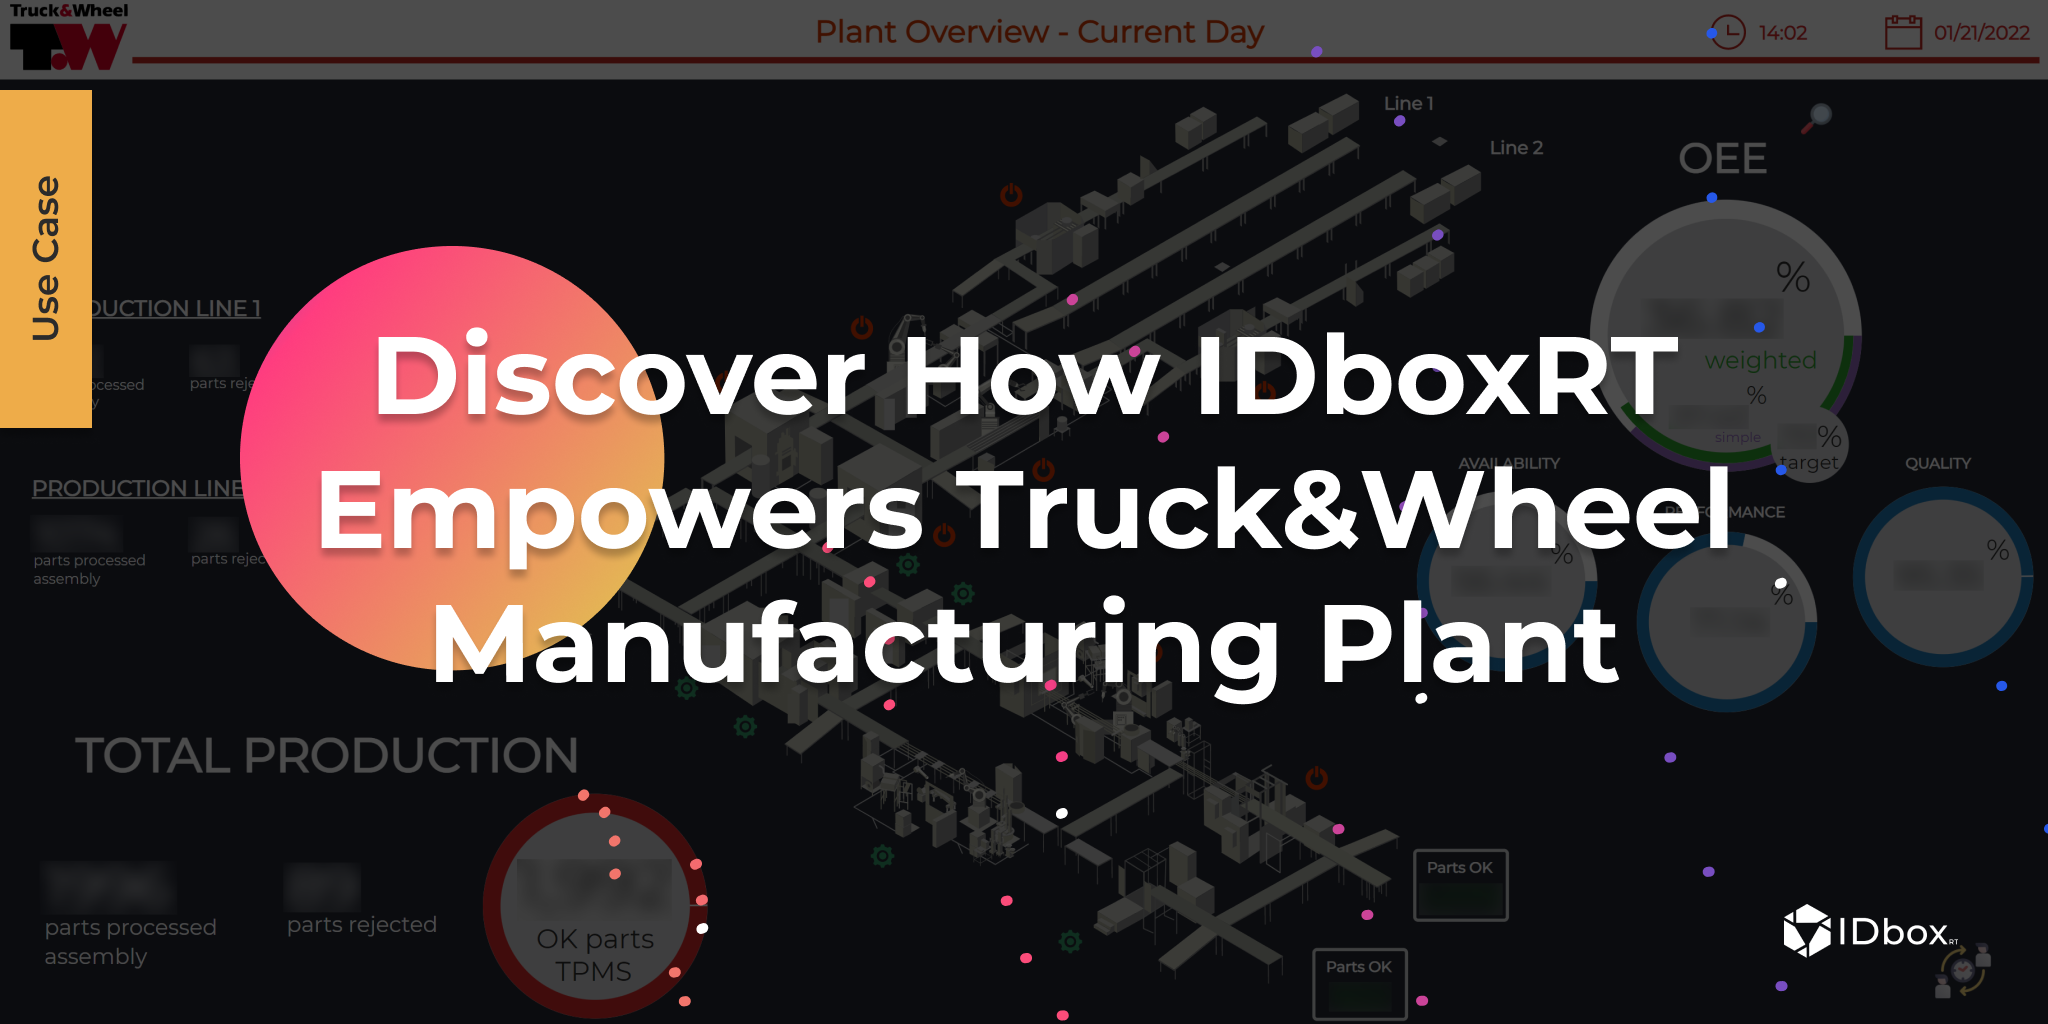 Use Case: Discover How IDboxRT Empowers Truck&Wheel Manufacturing Plant